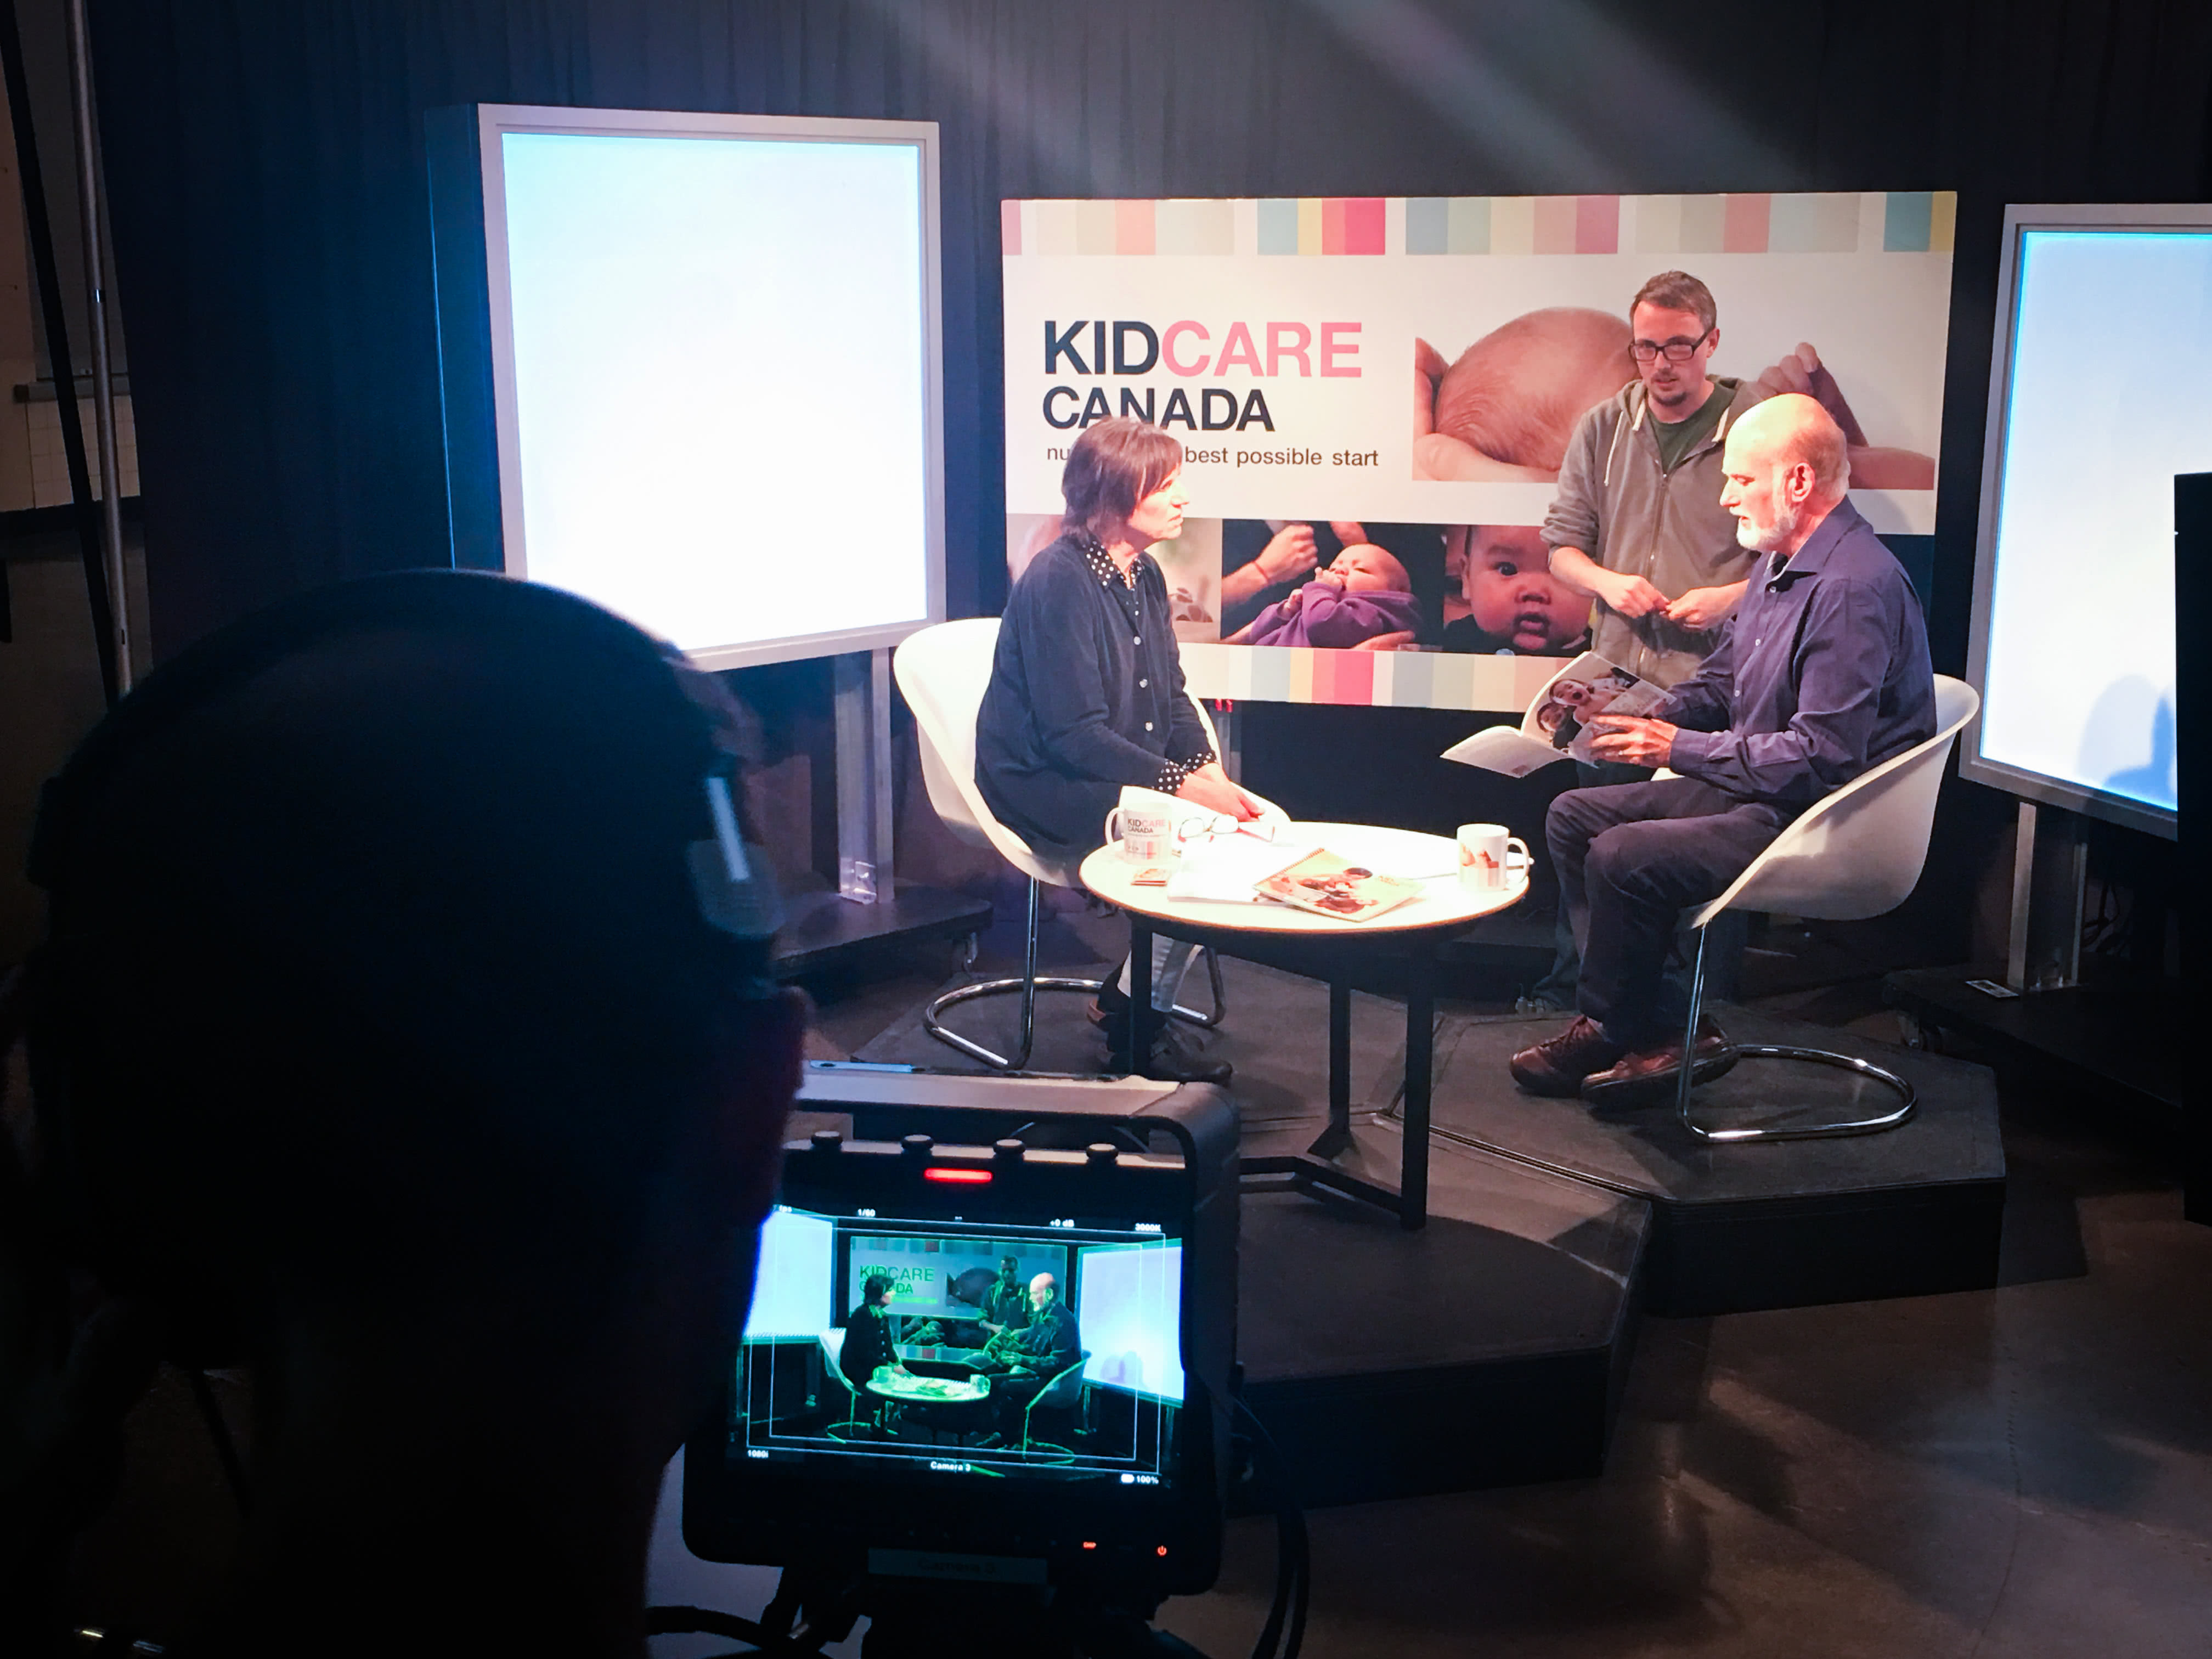 Dr. Andrew Macnab (pediatrician) featured on “Conversations with KIDCARECANADA” on Shaw TV.